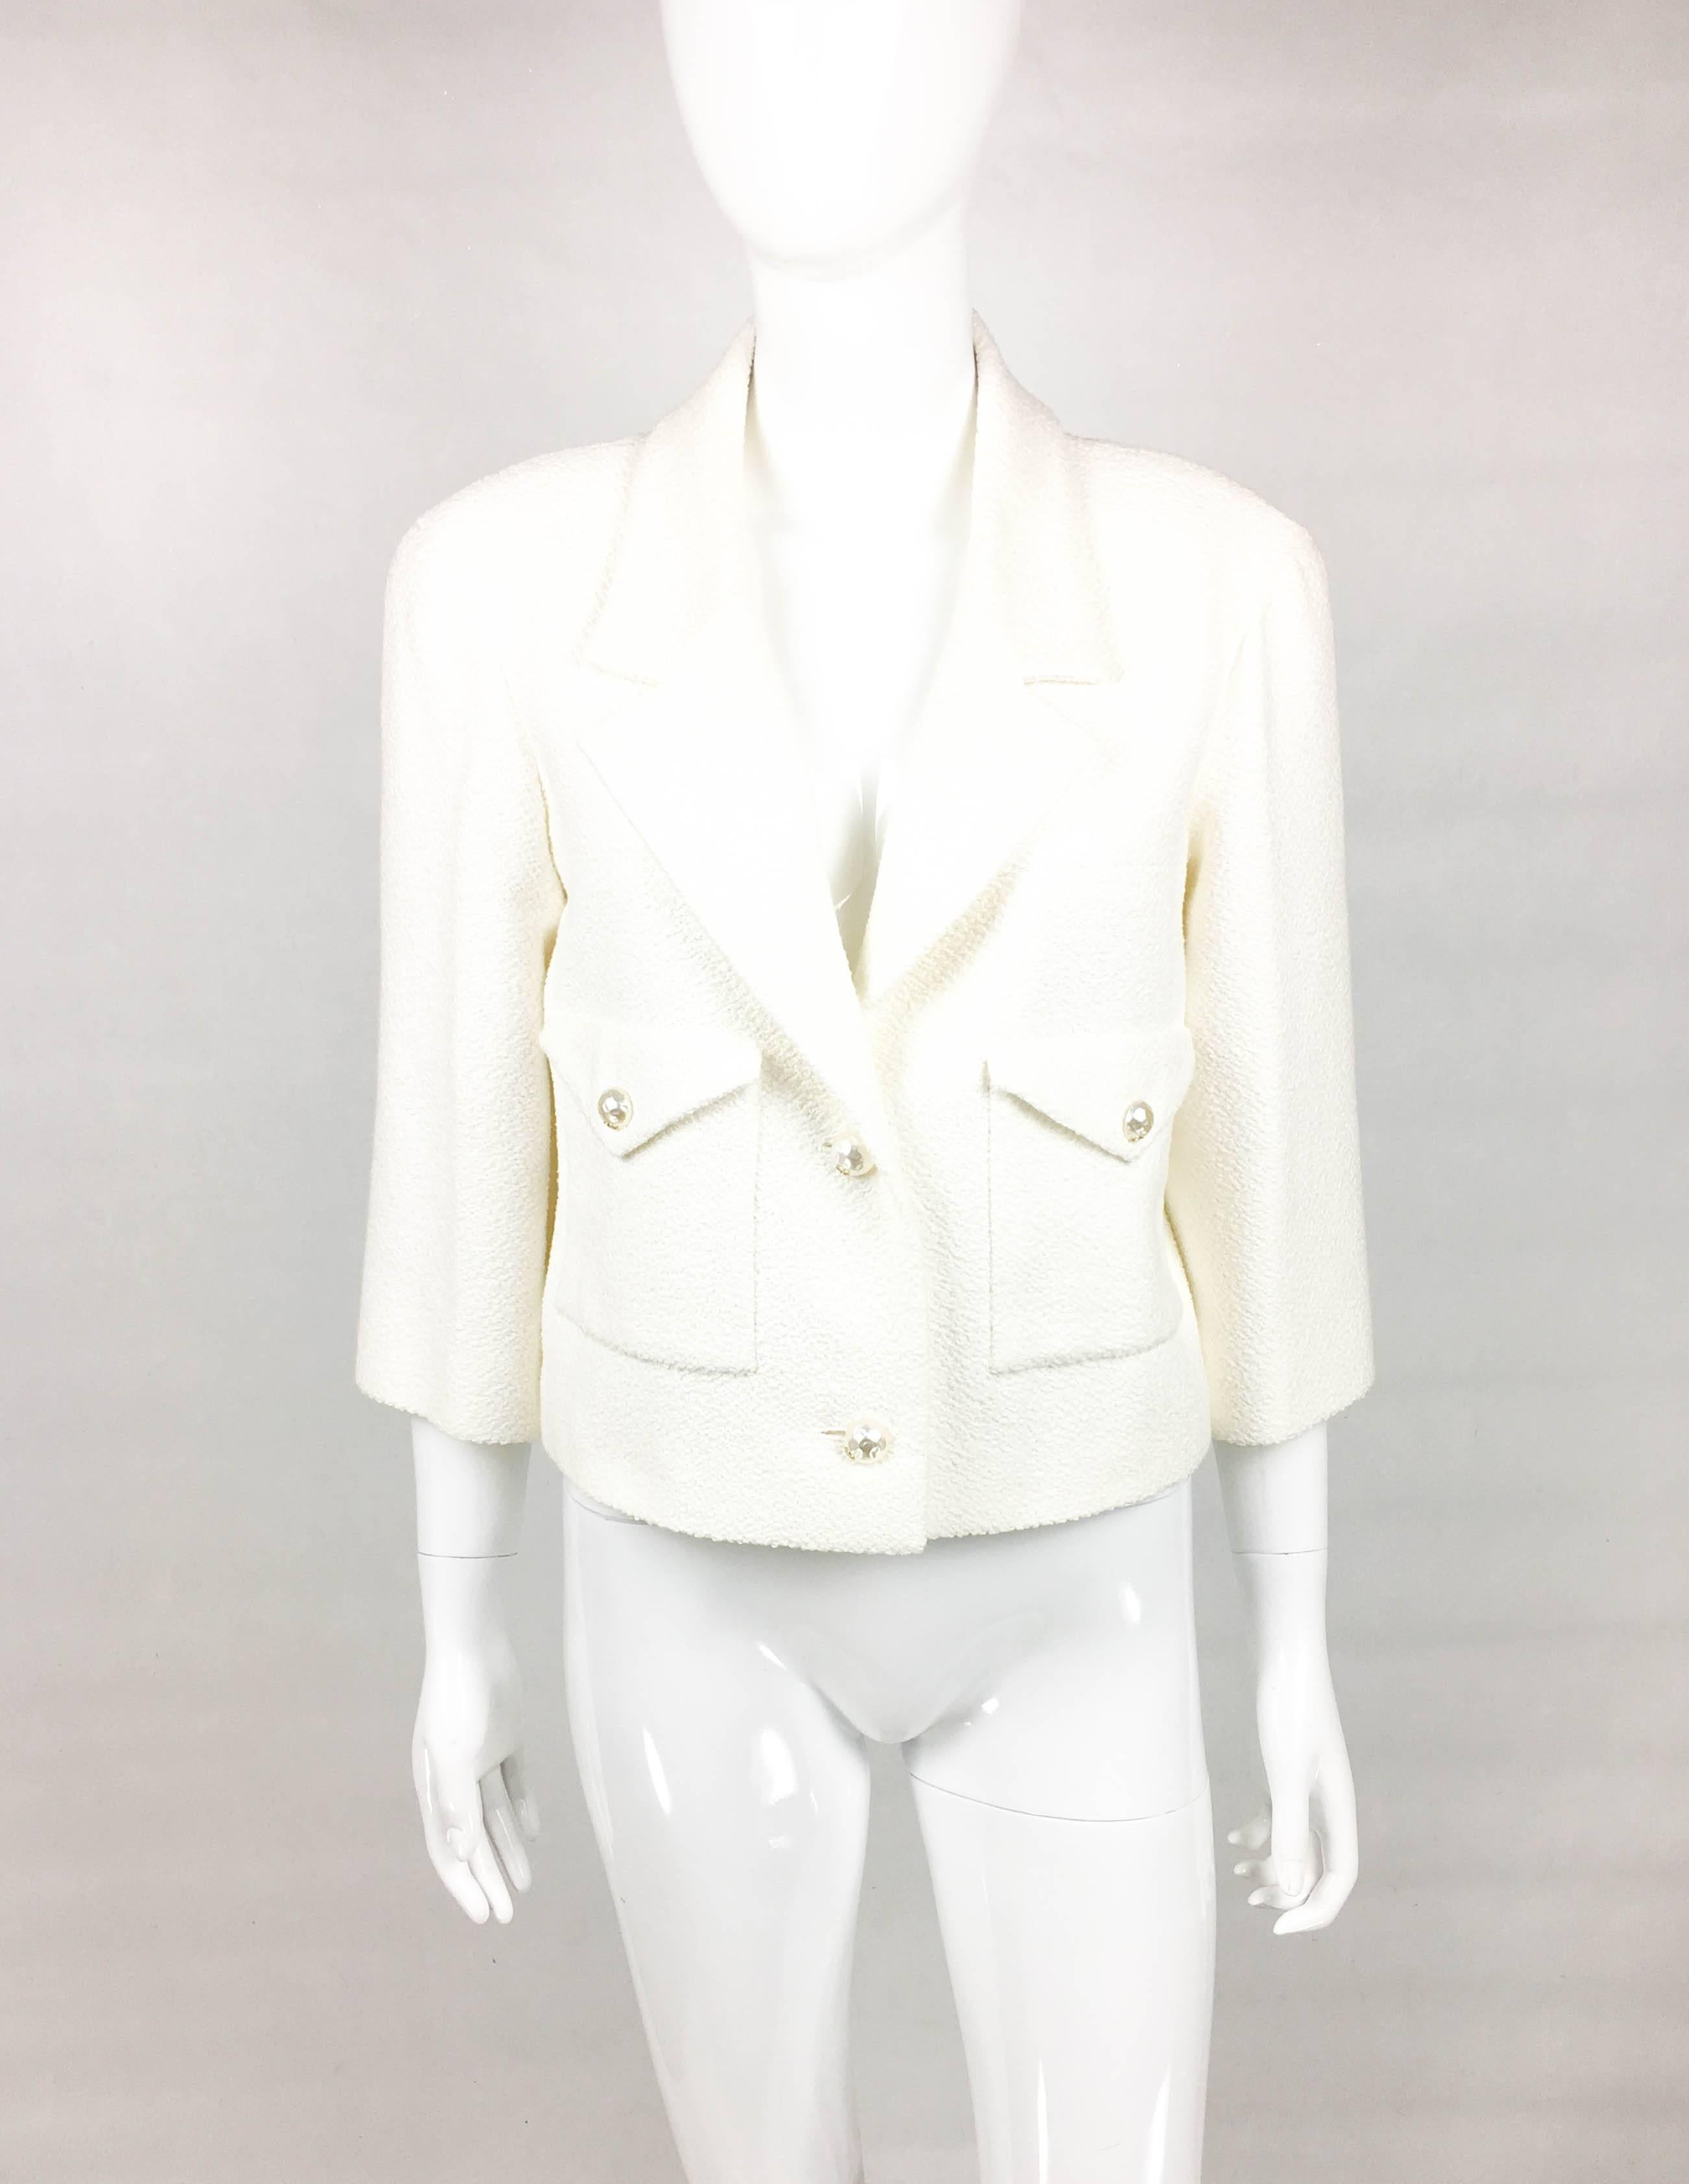 Chanel White Cotton-Blend Jacket With Faux-Pearl Buttons. This beautiful jacket was created for the Chanel 2012 Spring / Summer Collection. An identical design can be seen on a model on the runway show (please refer to photos). Made in a texturized